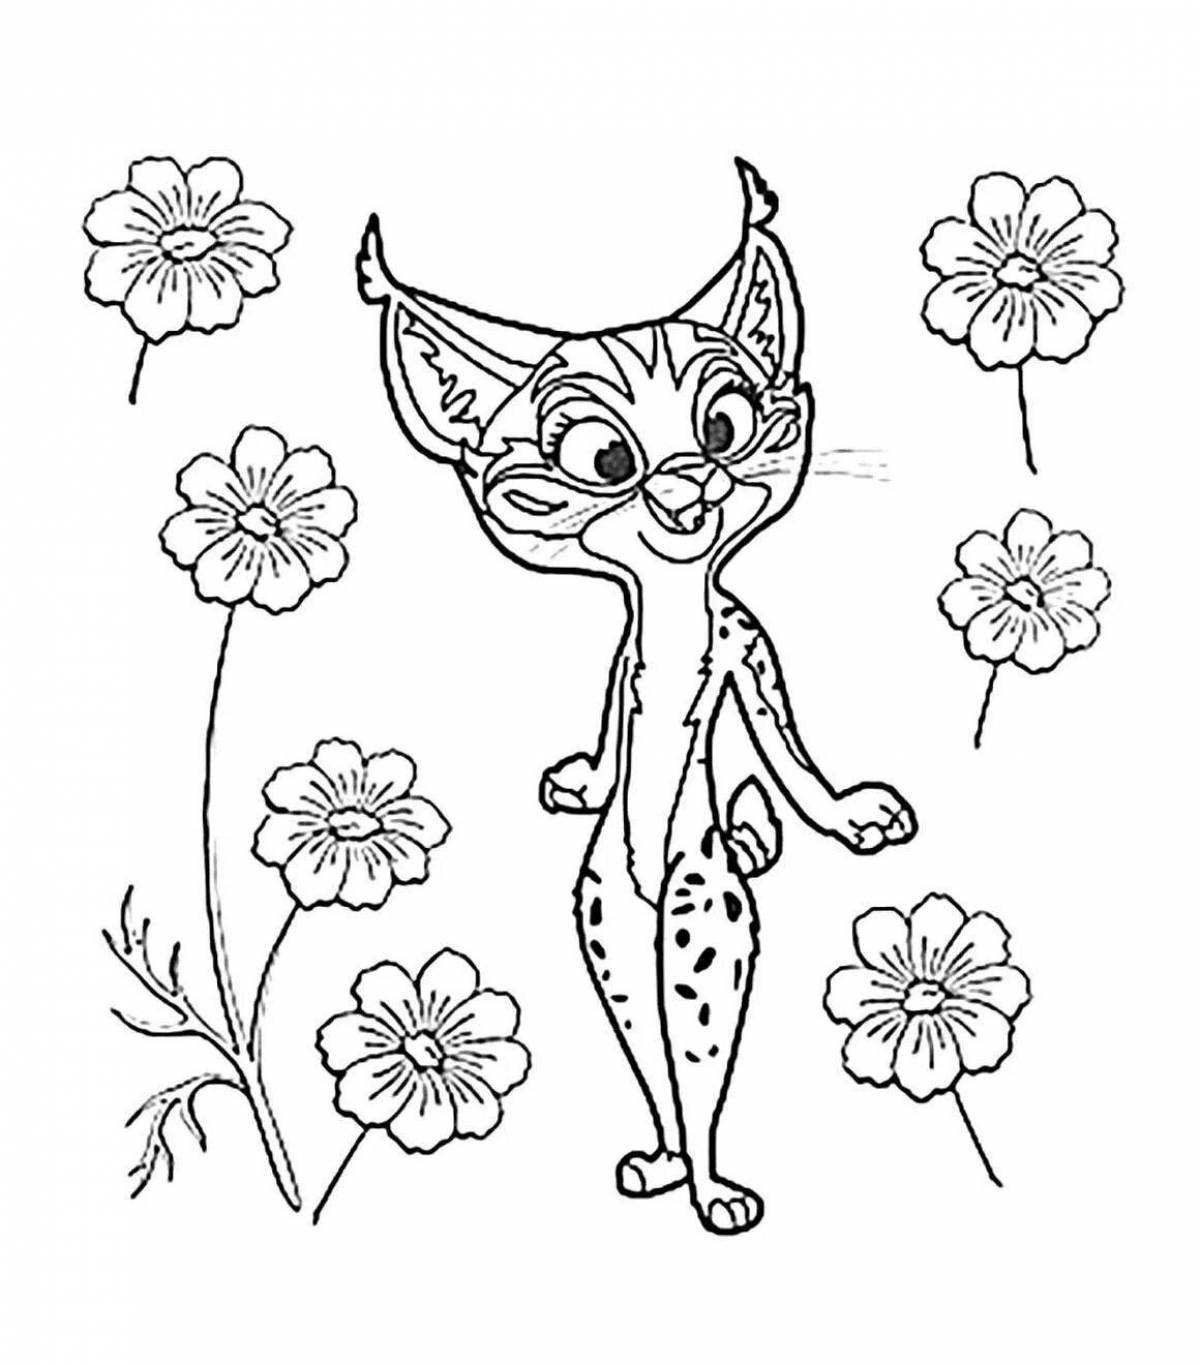 Leo relaxing coloring page